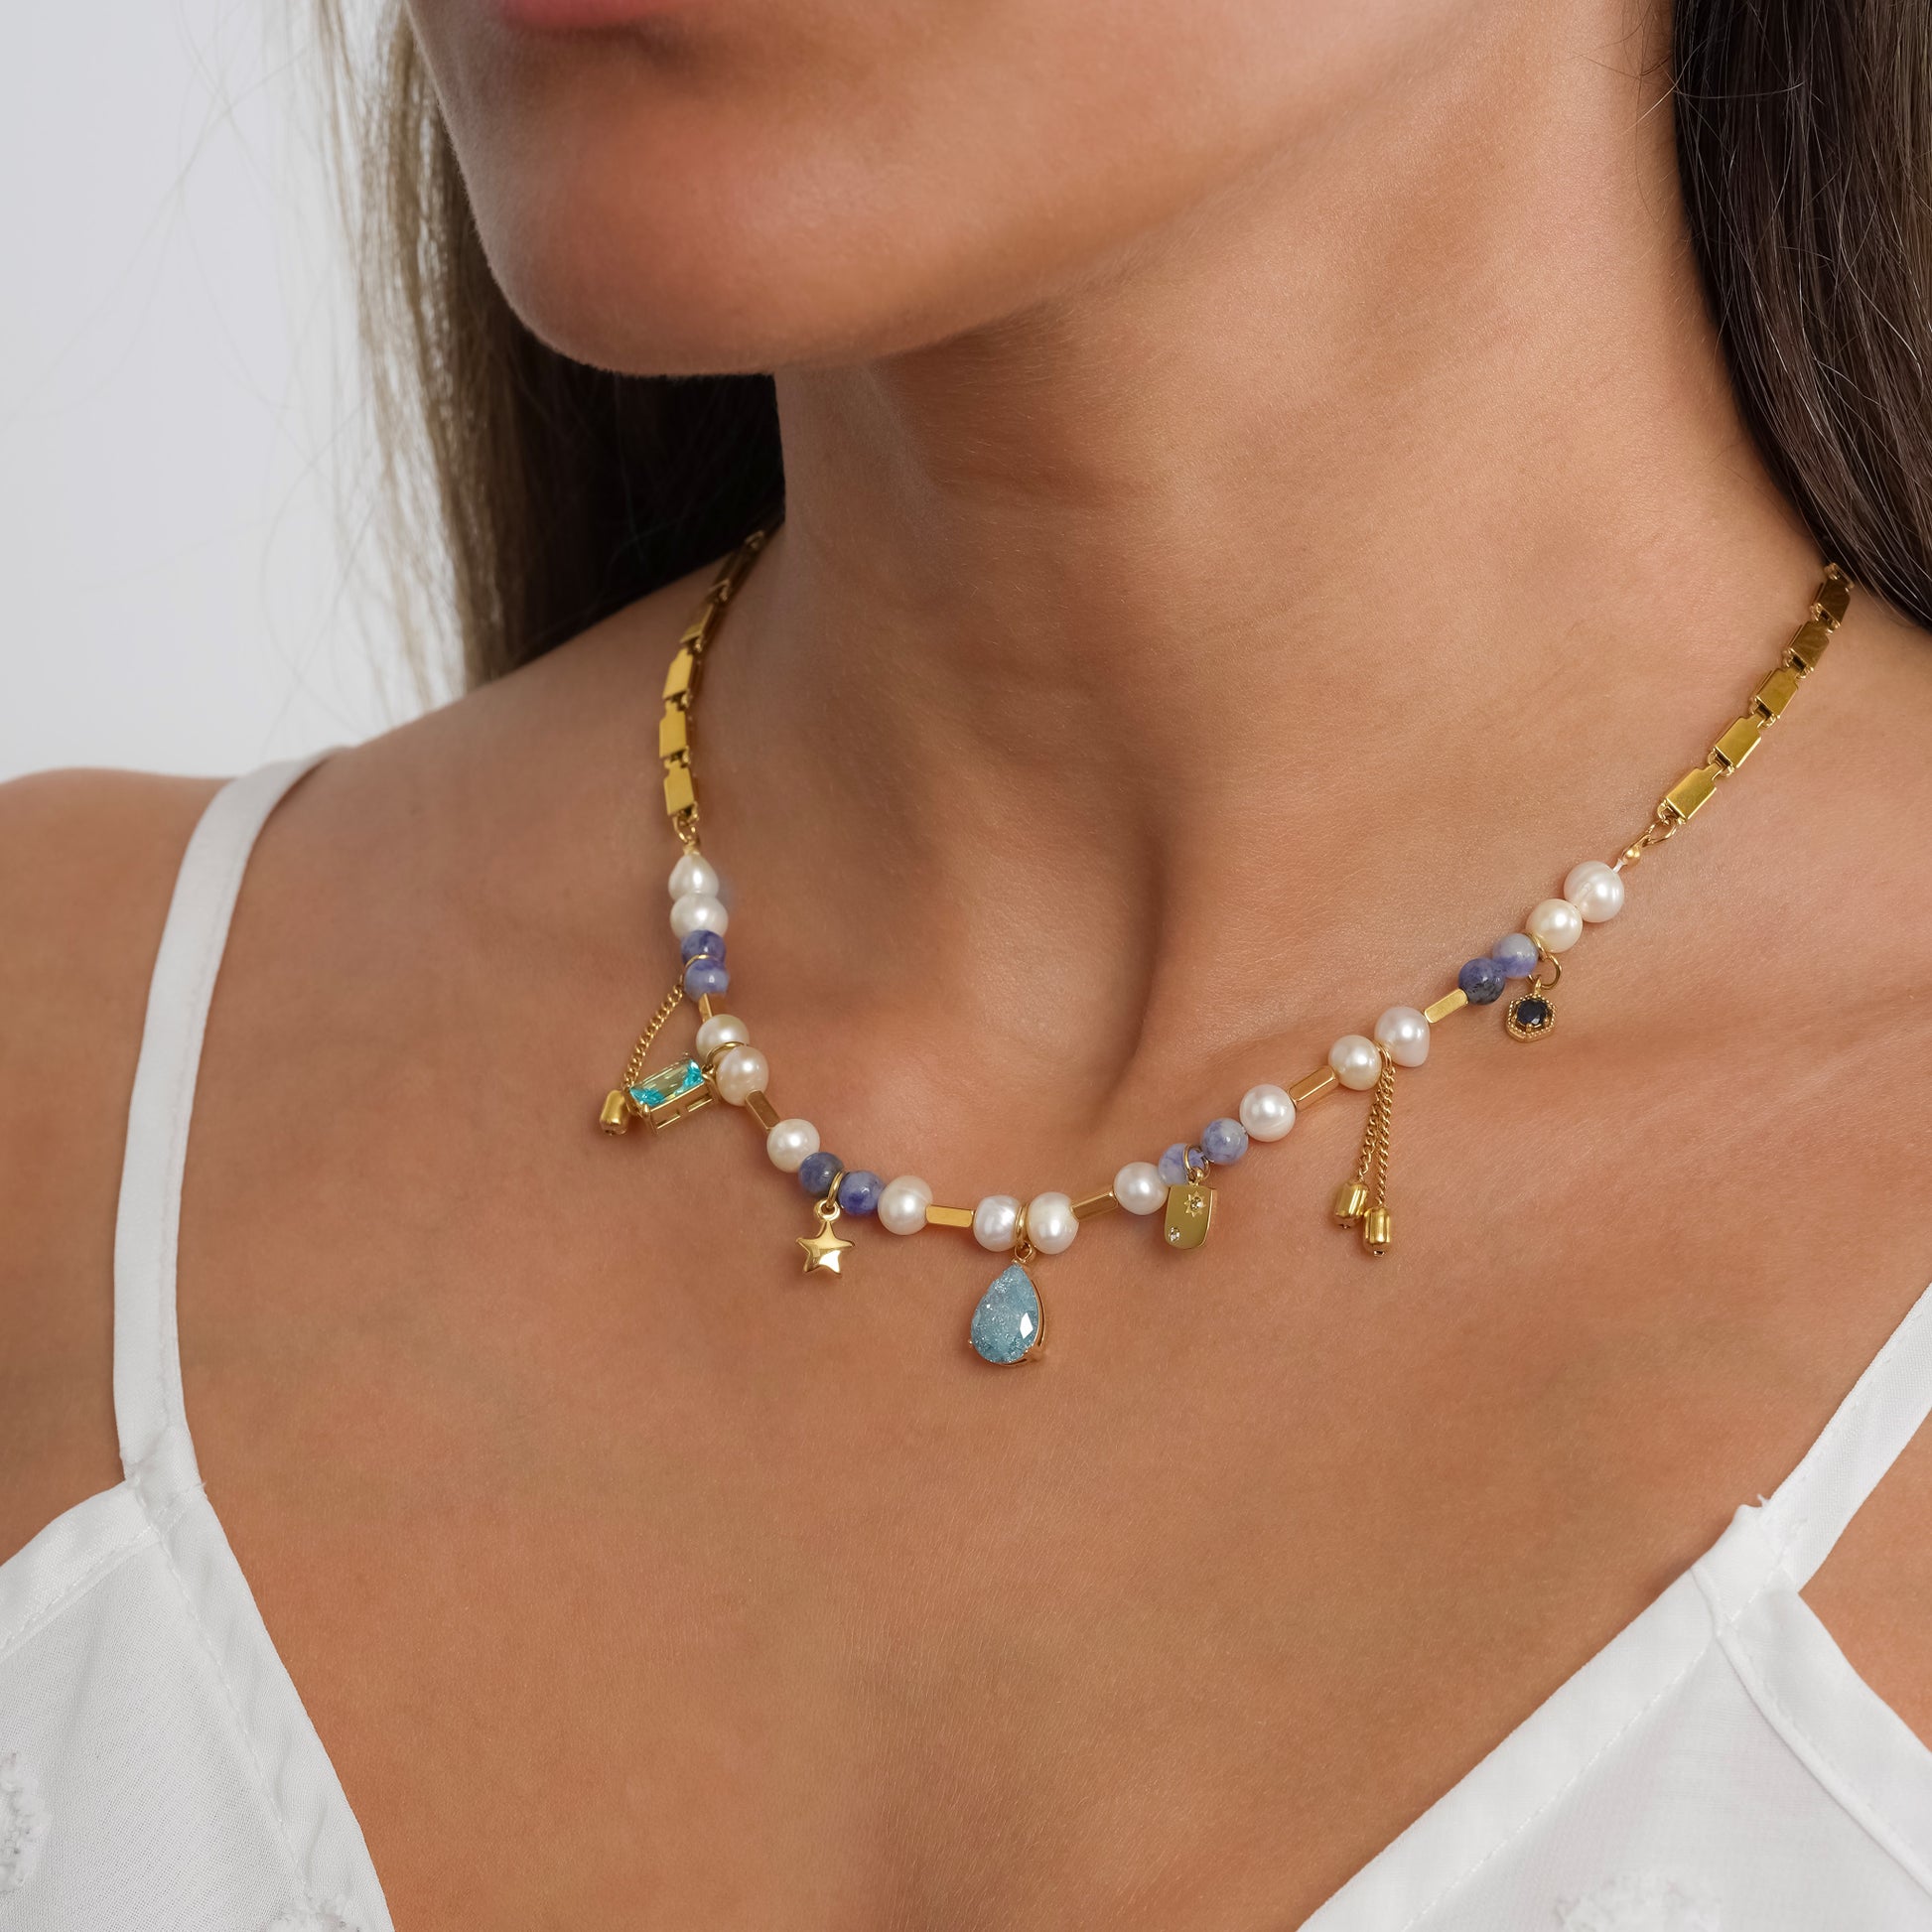 A model in a white dress wearing Crystal Charm Pearl Gold Necklace. Close-up image of the necklace.